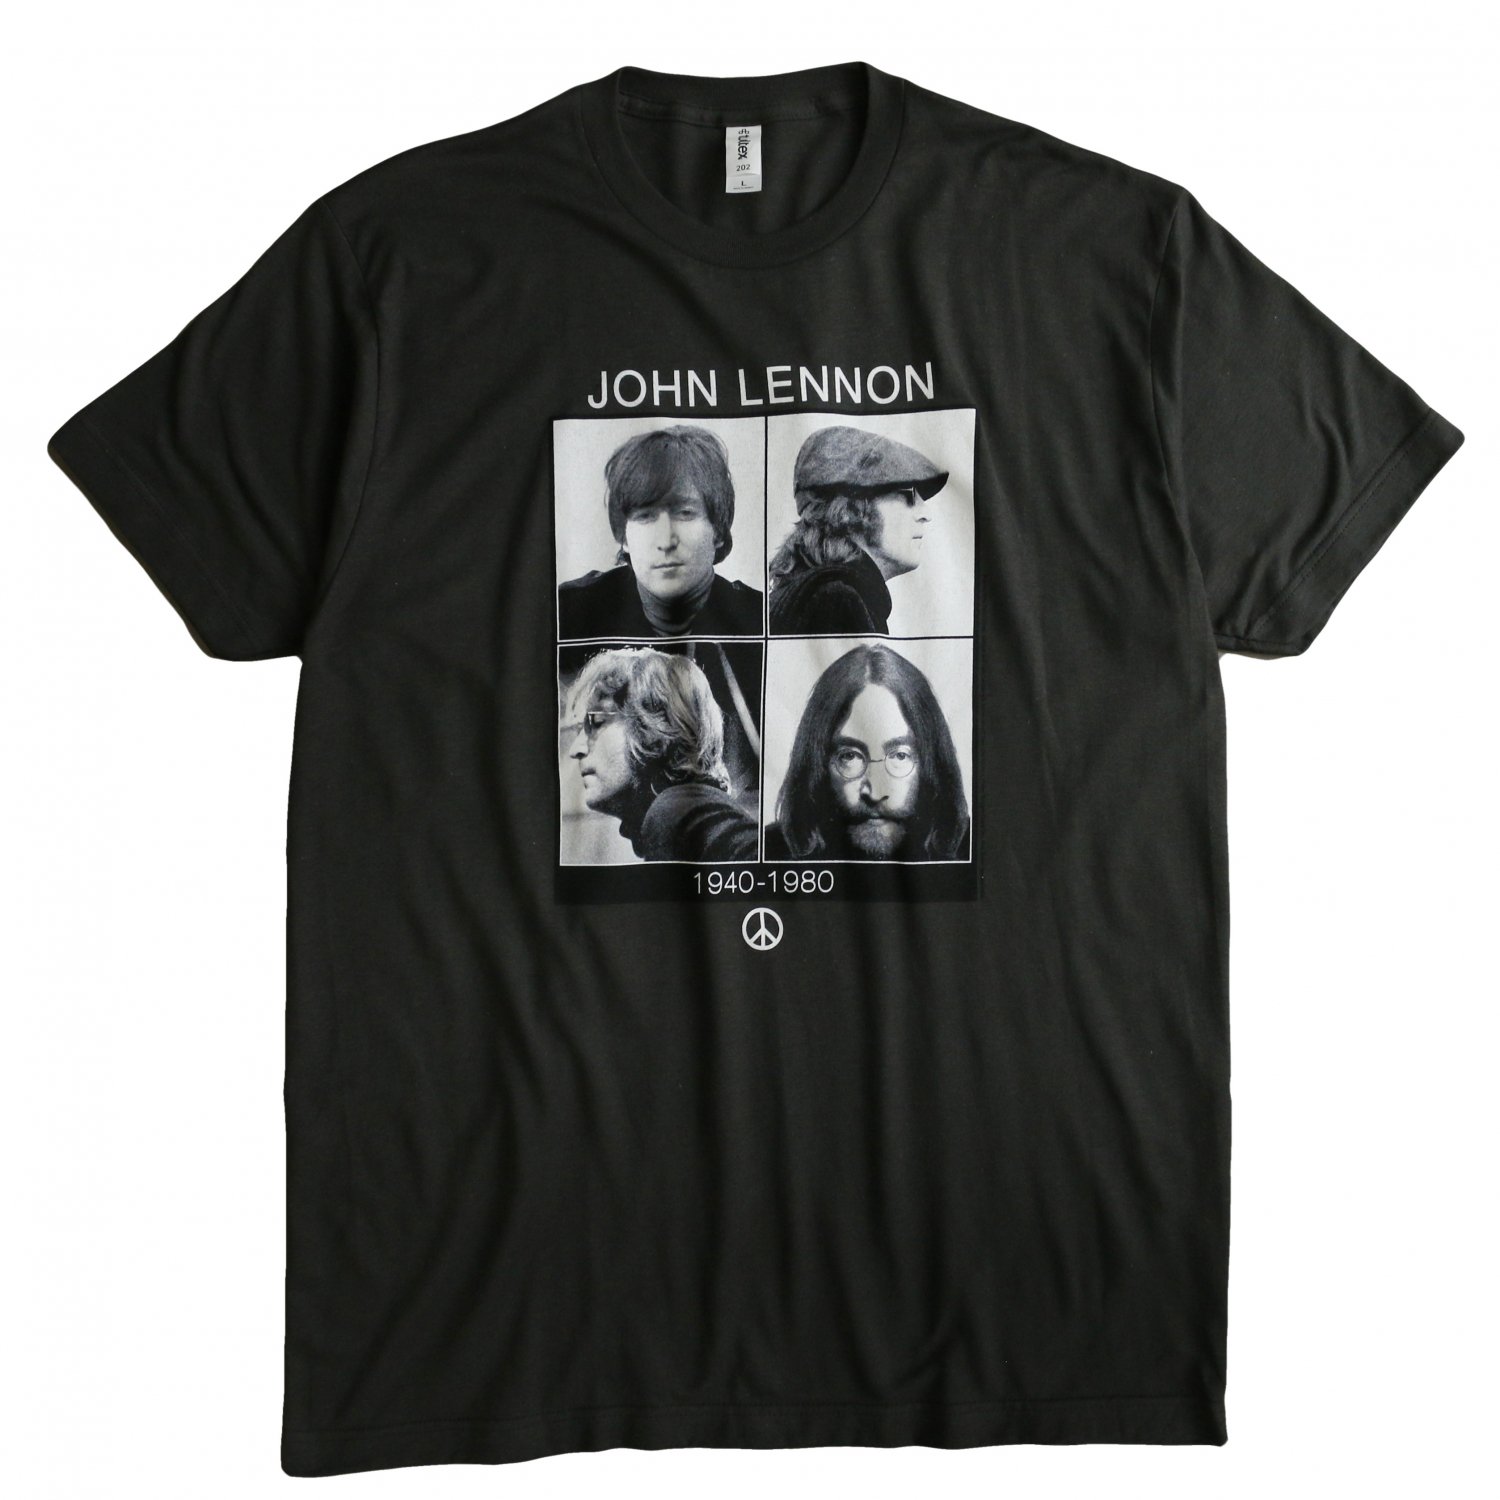 <img class='new_mark_img1' src='https://img.shop-pro.jp/img/new/icons8.gif' style='border:none;display:inline;margin:0px;padding:0px;width:auto;' />Music Tee / S/S TEE JOHN LENNON 